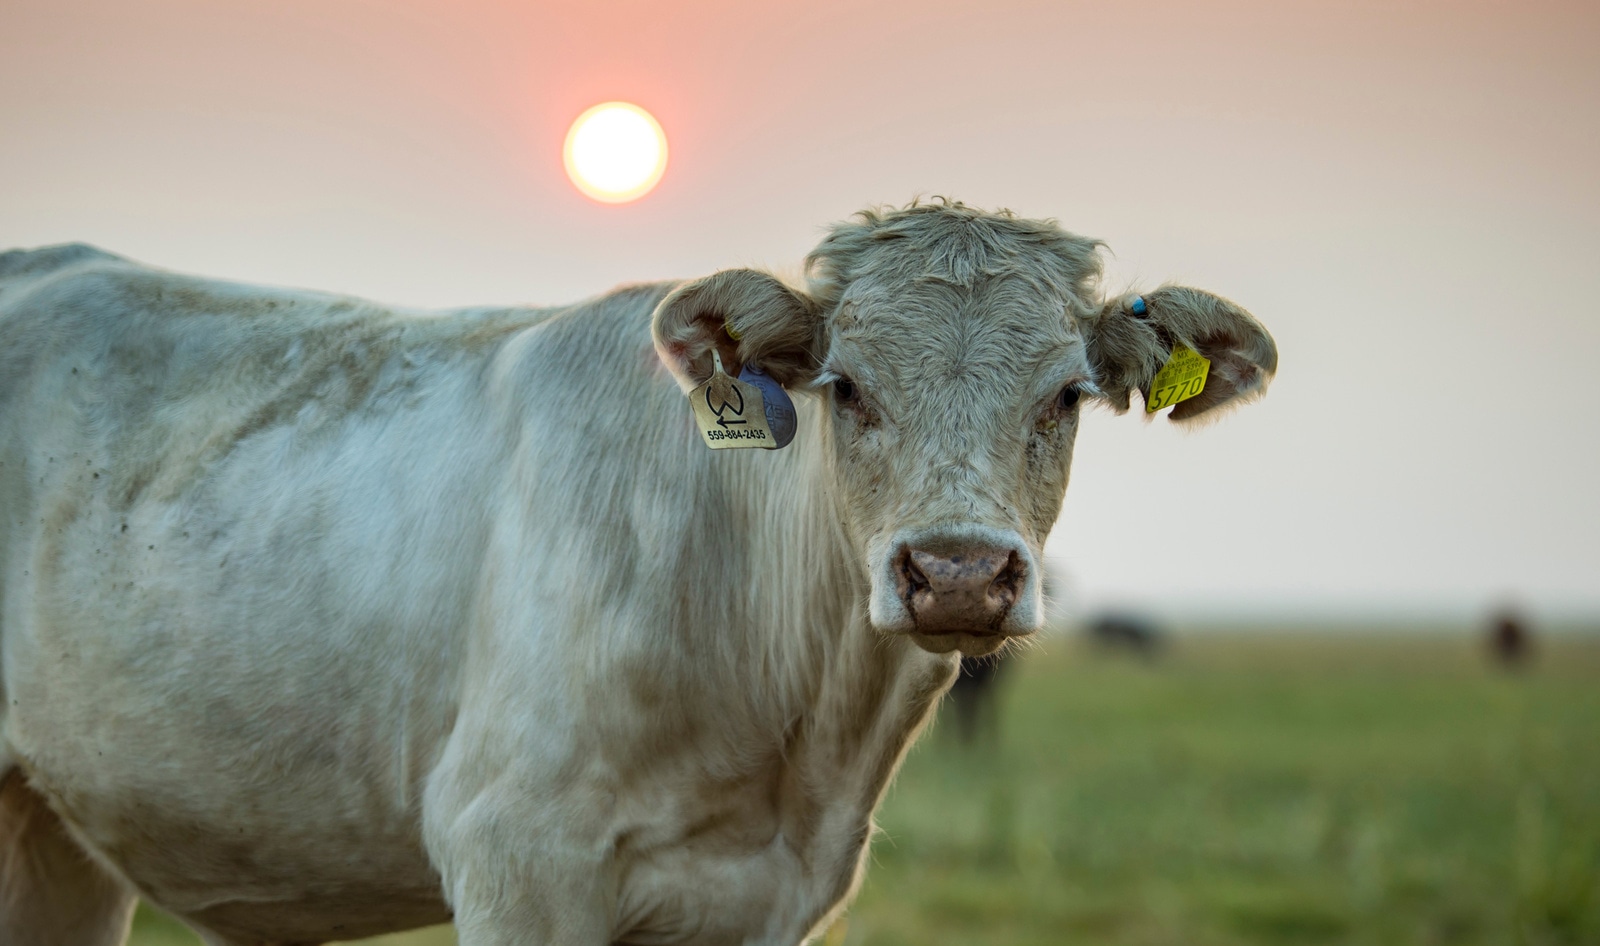 Animal Agriculture Linked to More than 12,000 Air Pollution Deaths Annually